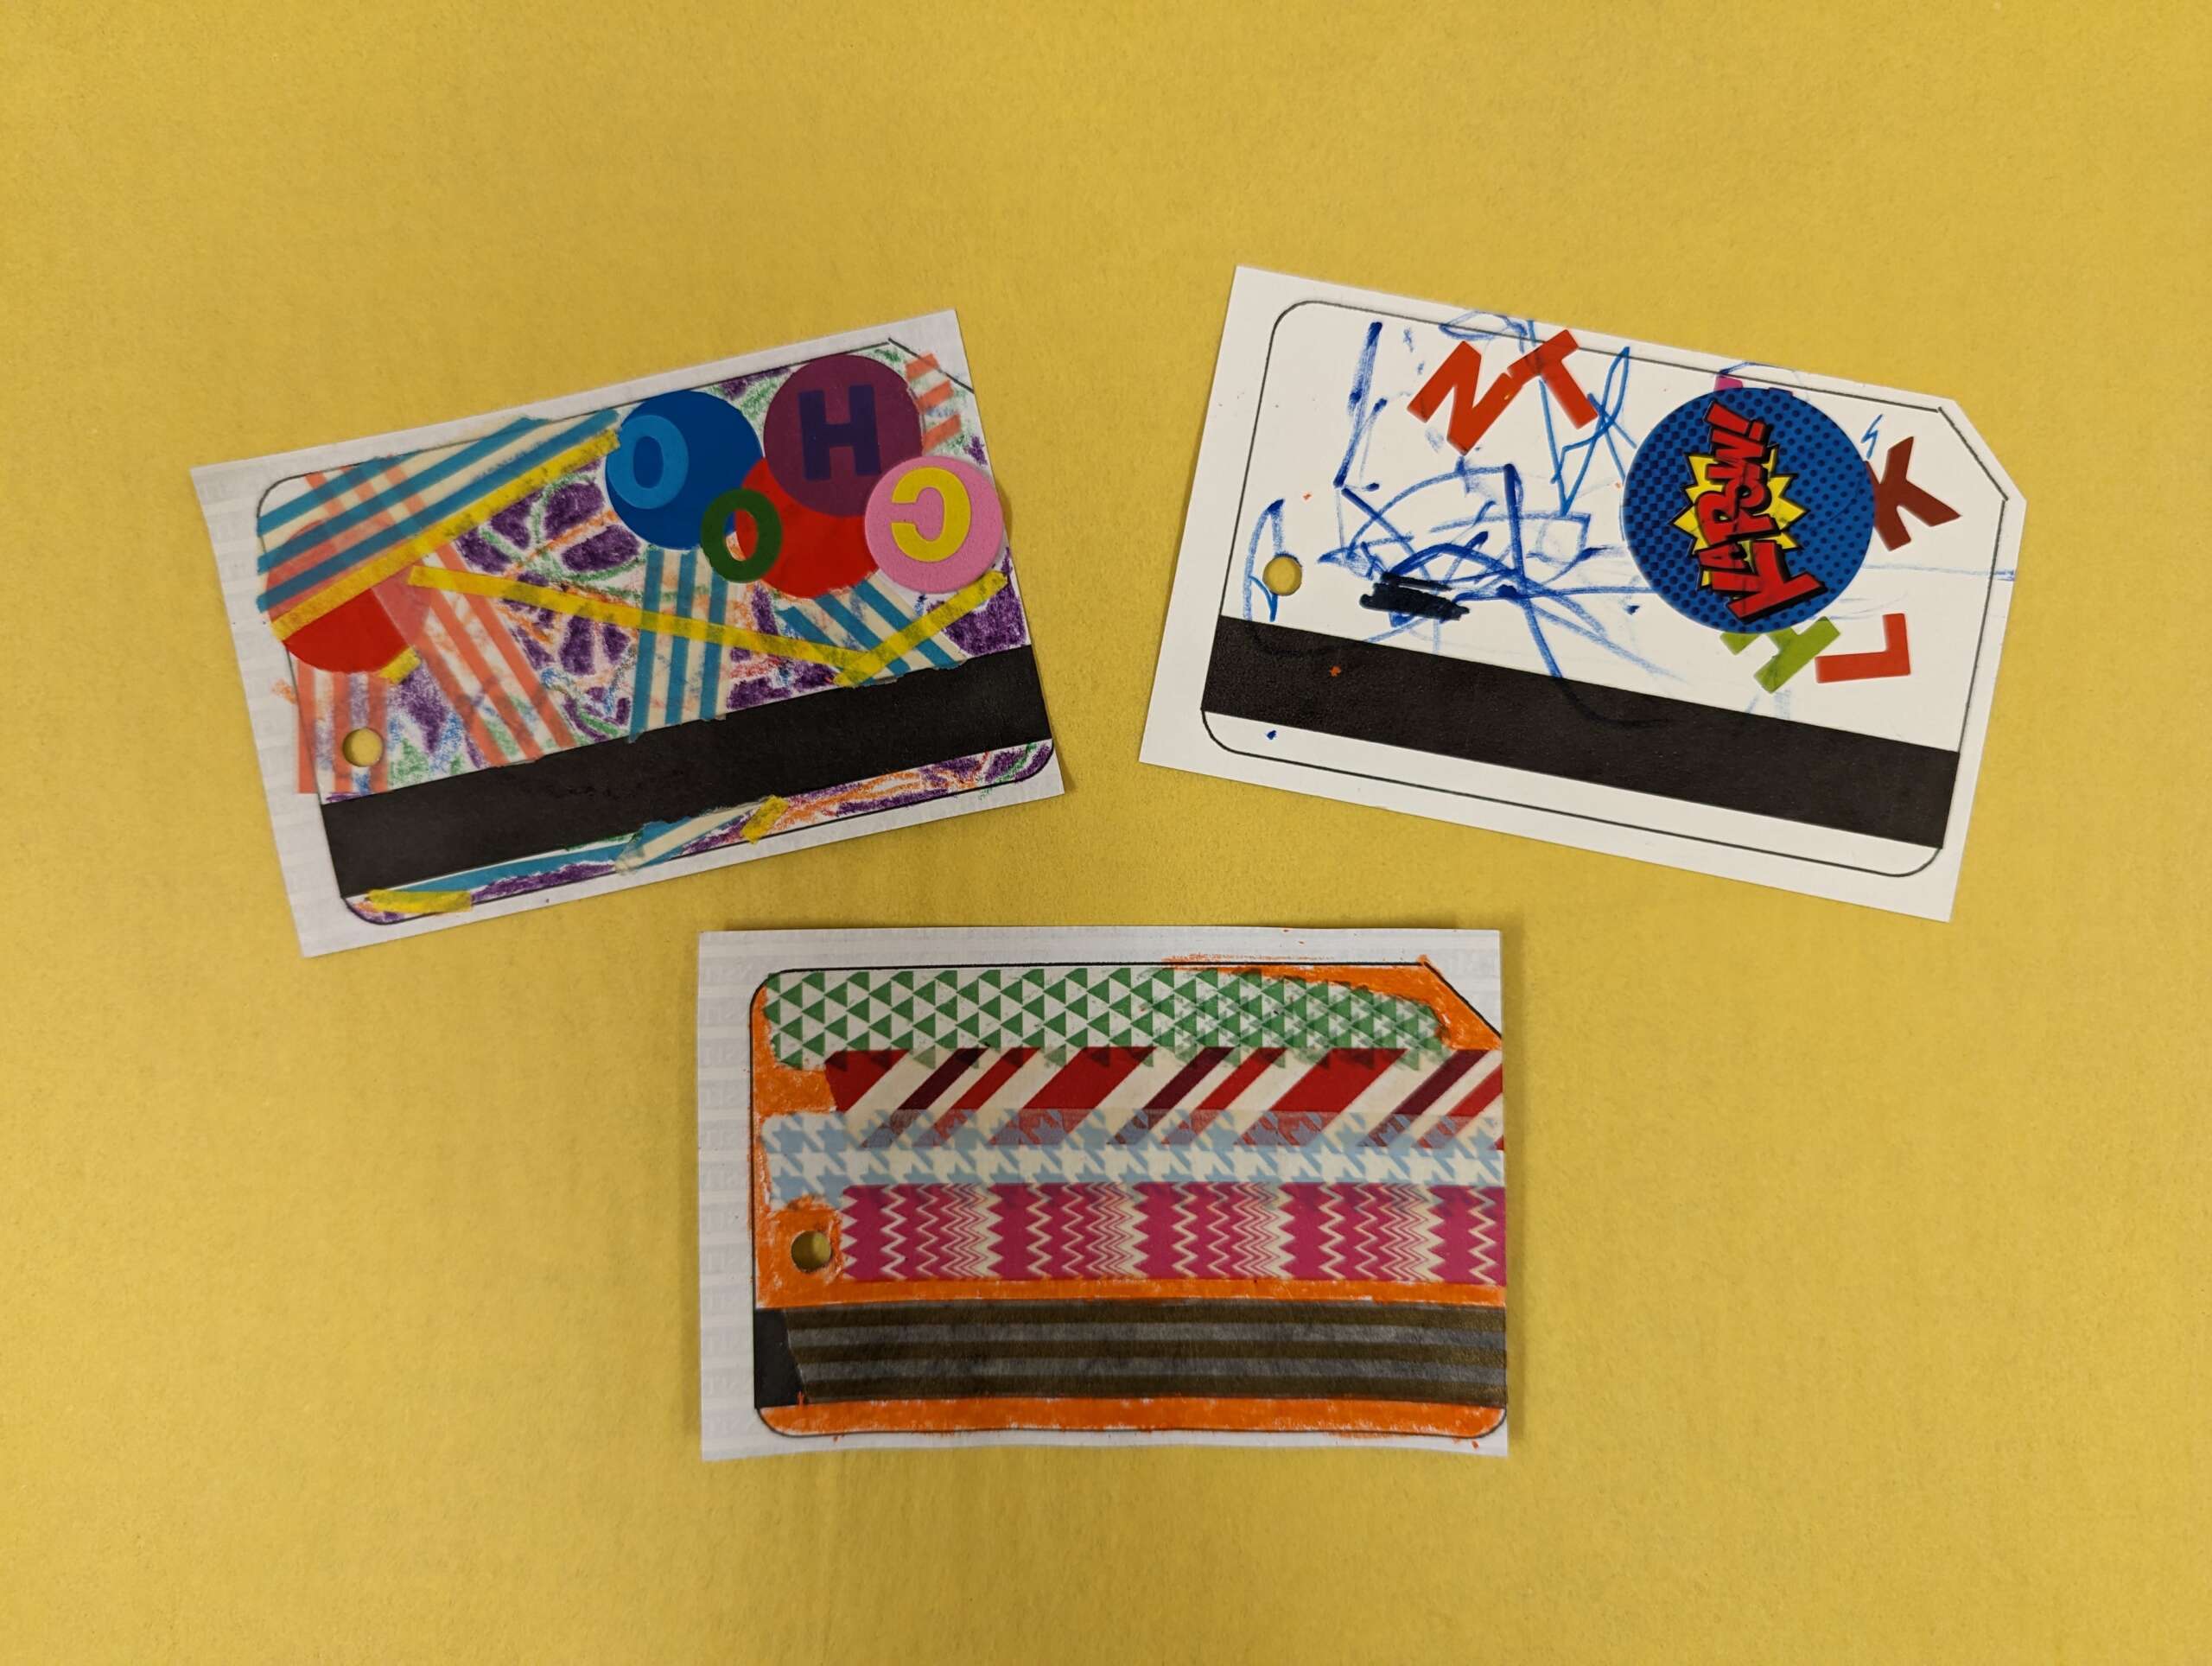 Three examples of MetroCards made from a mix of crayon, marker, stickers, and colored tape.